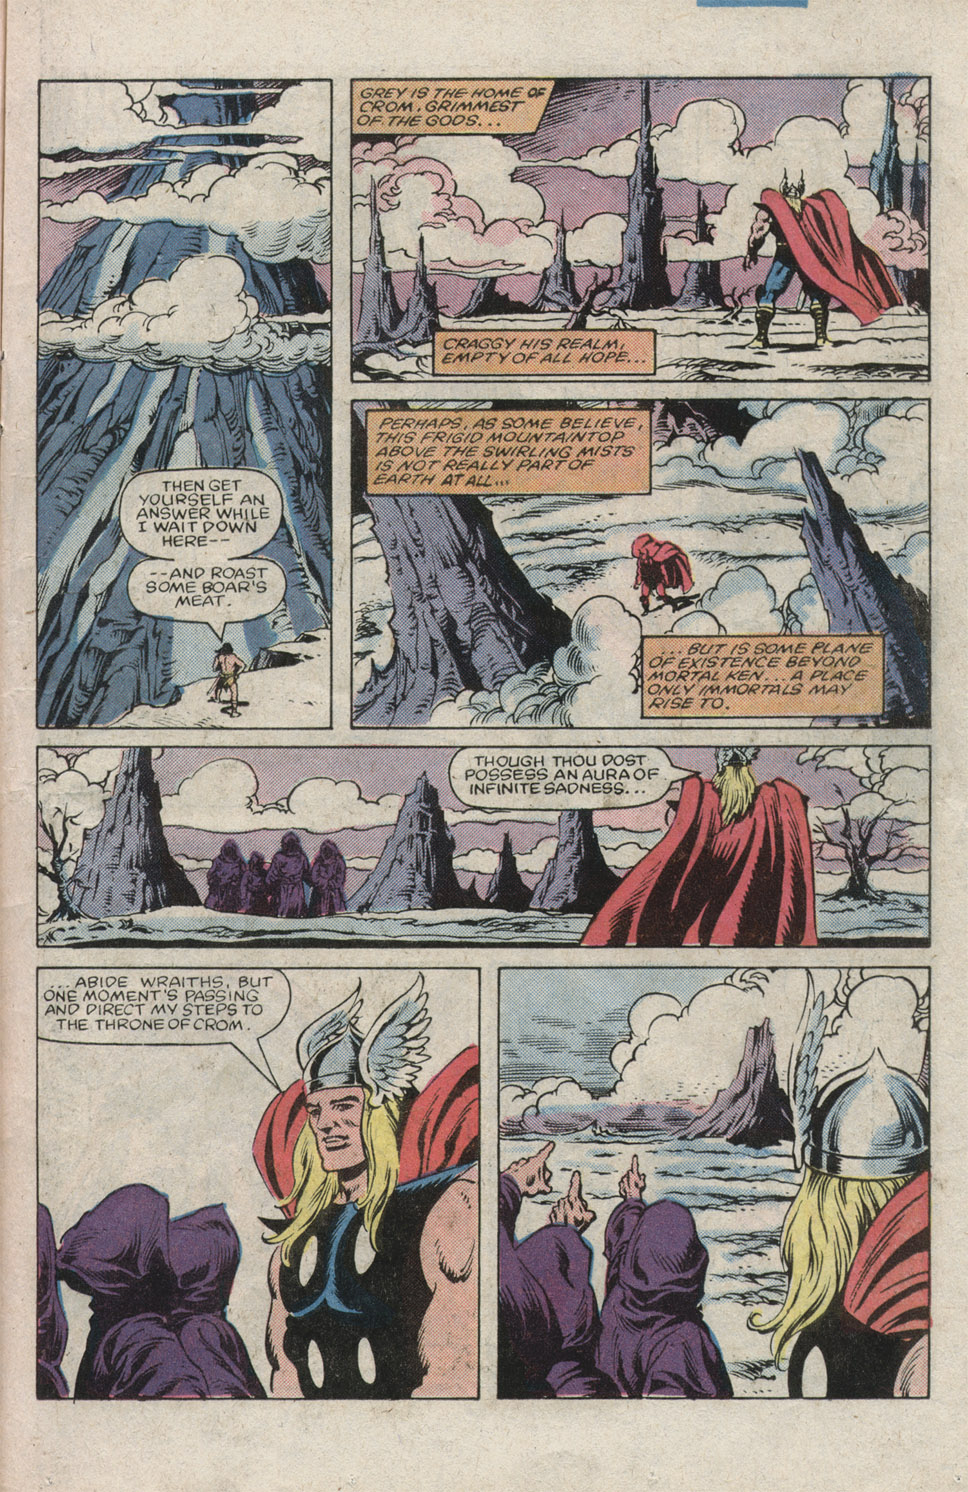 What If? (1977) issue 39 - Thor battled conan - Page 23